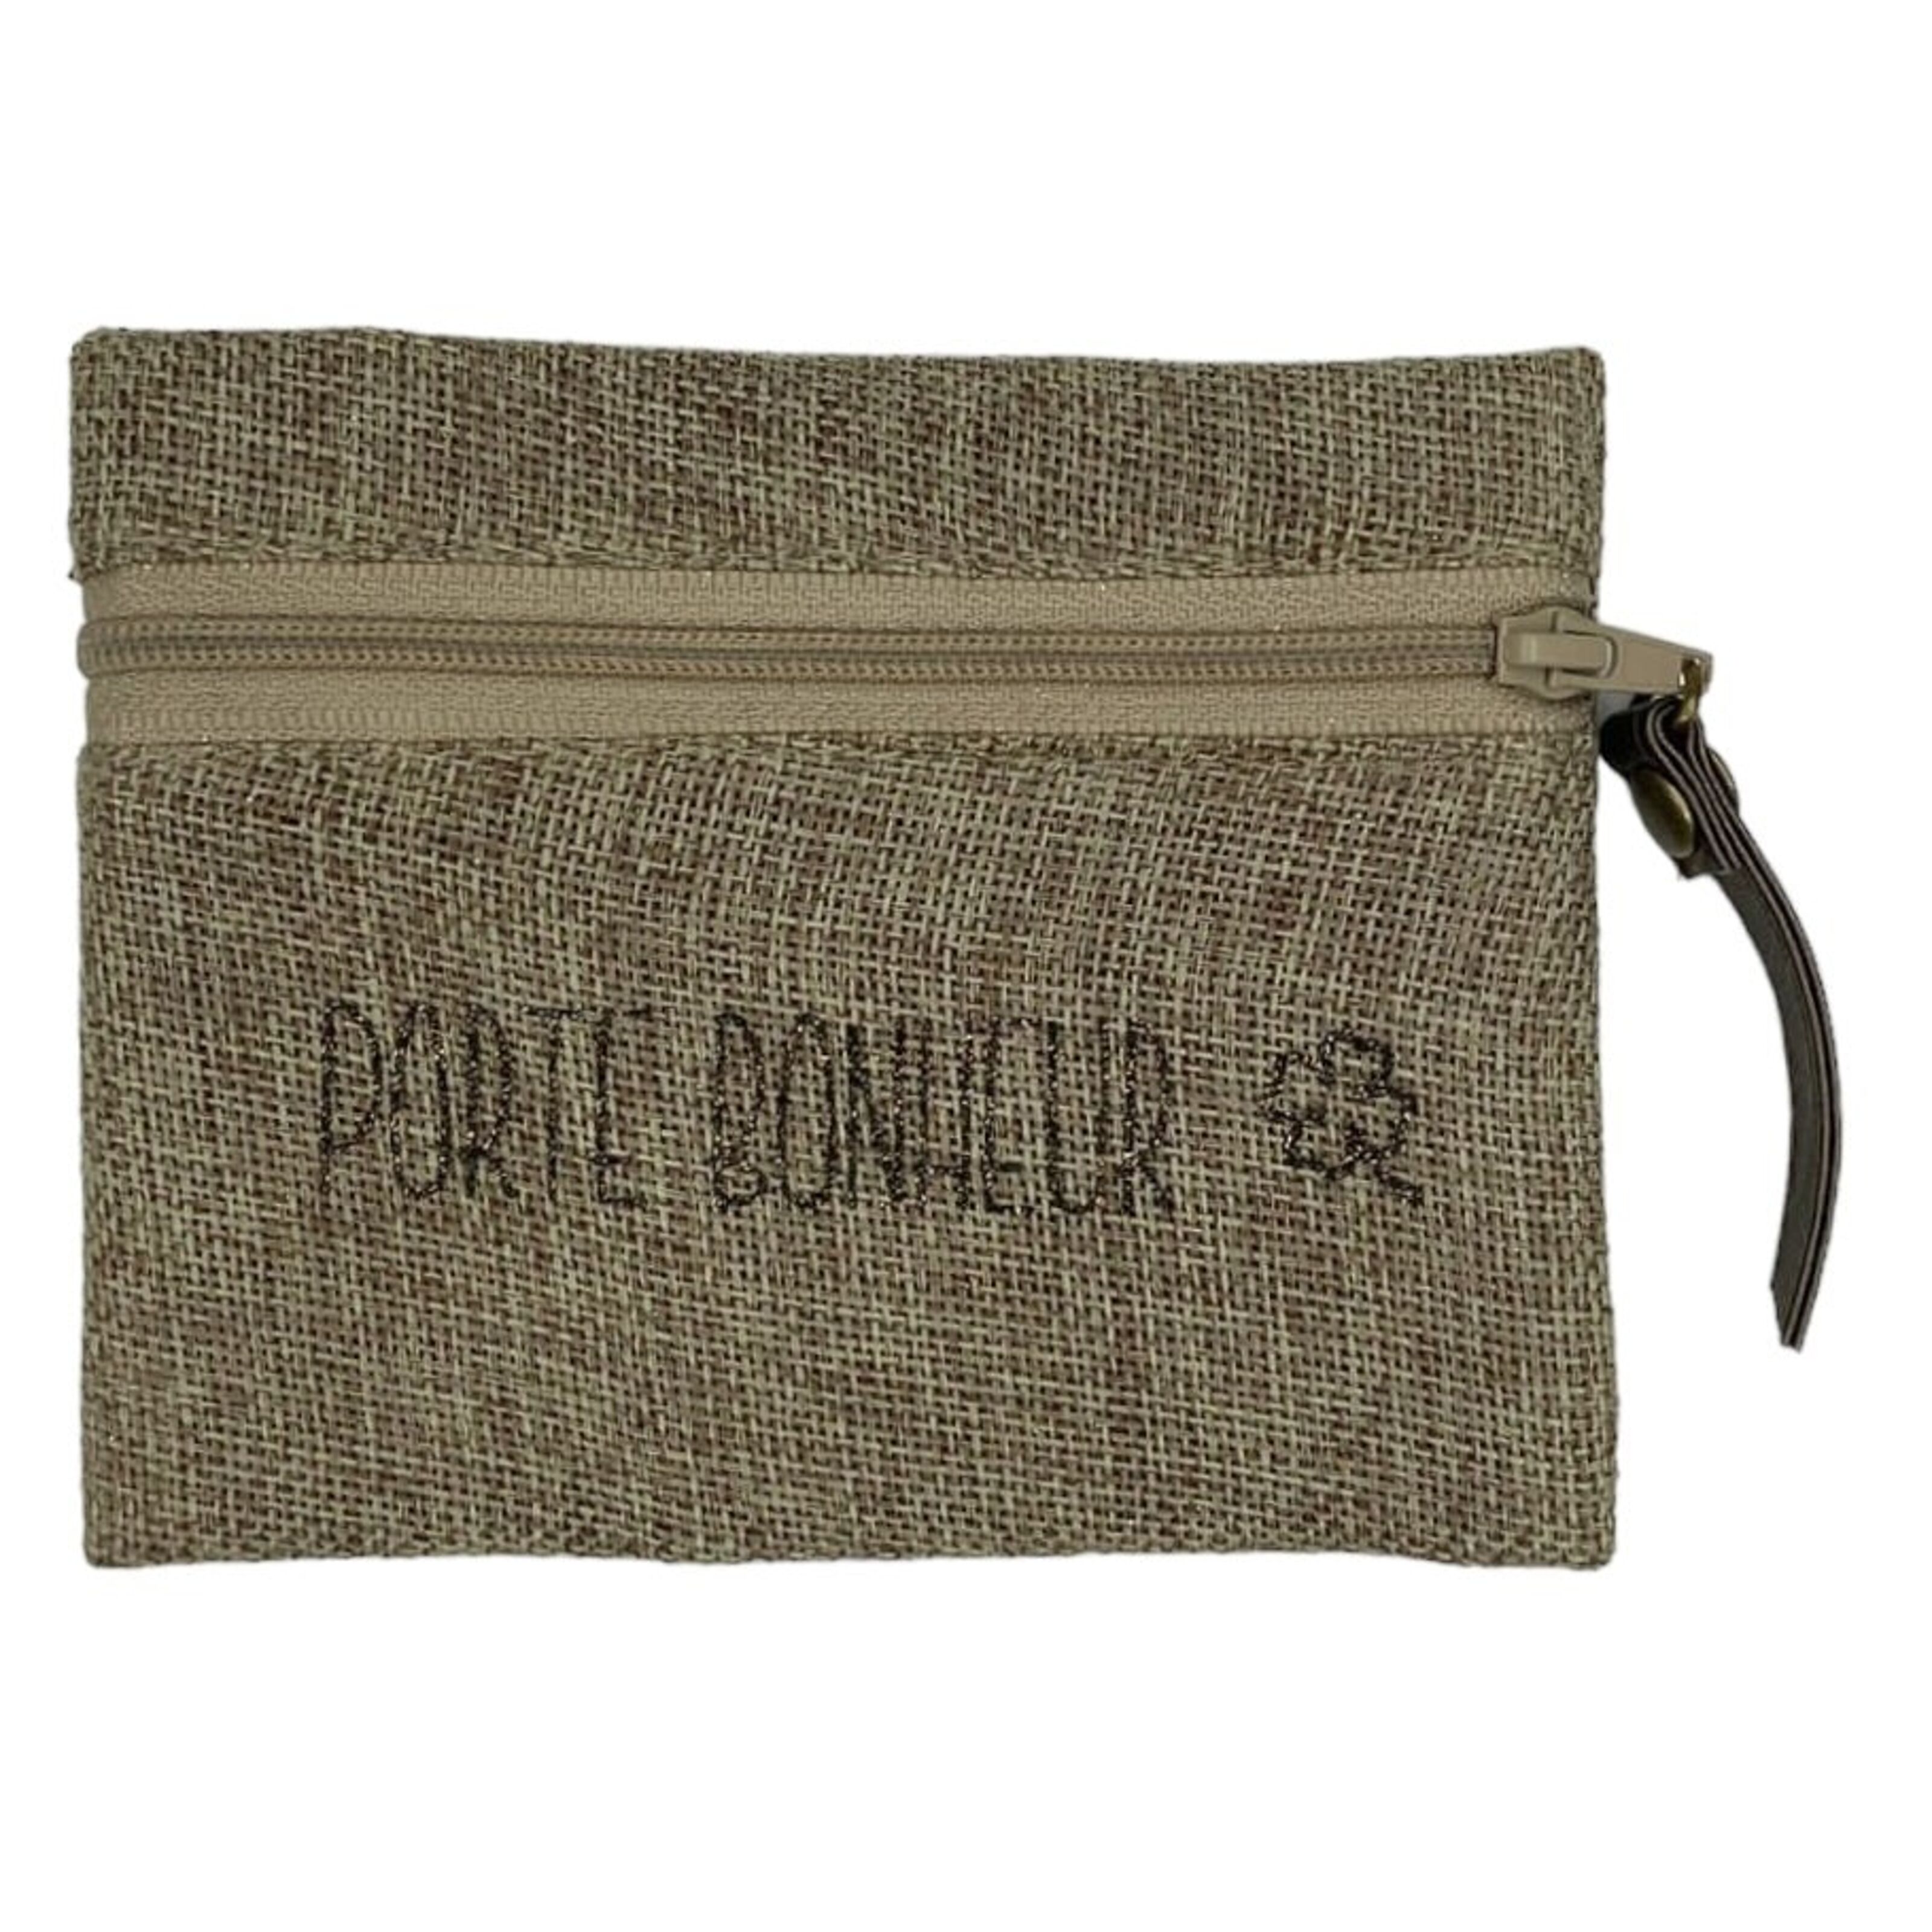 Buy wholesale Pouch S, Happy charm, shimmering jute